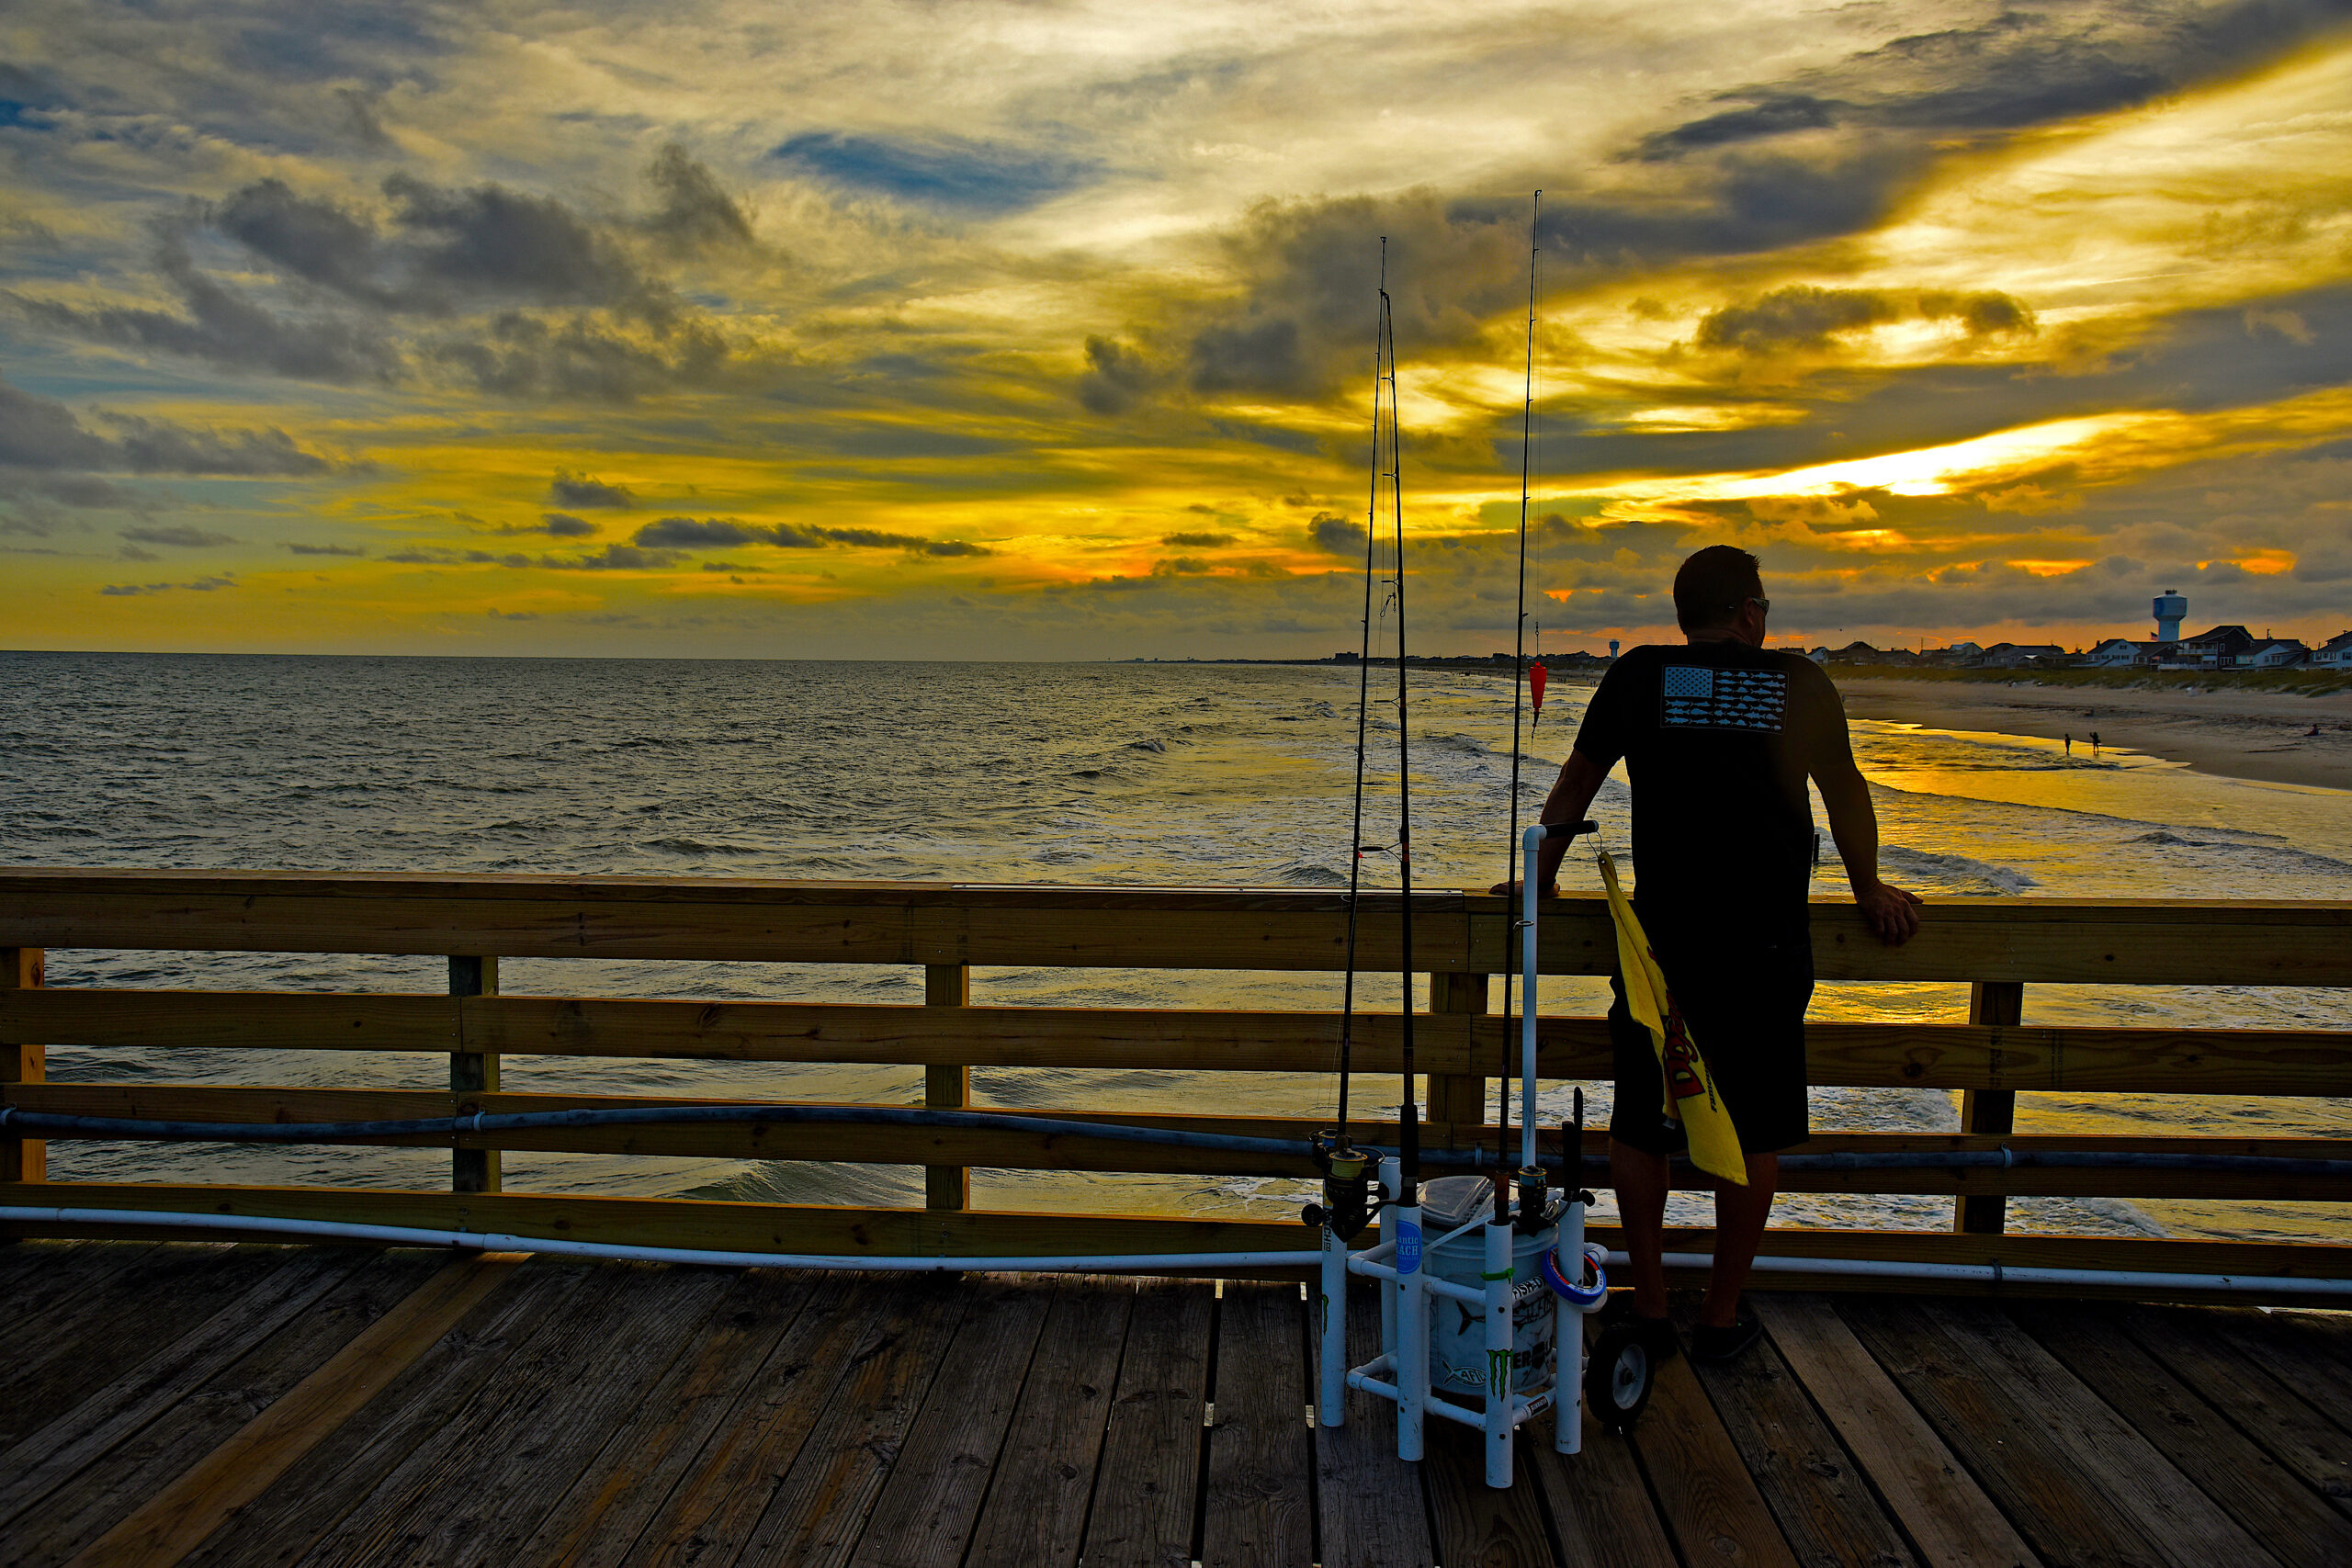 Fisherman pauses for a moment to watch the sun set from Oceanna Fishing Pier in Atlantic Beach.